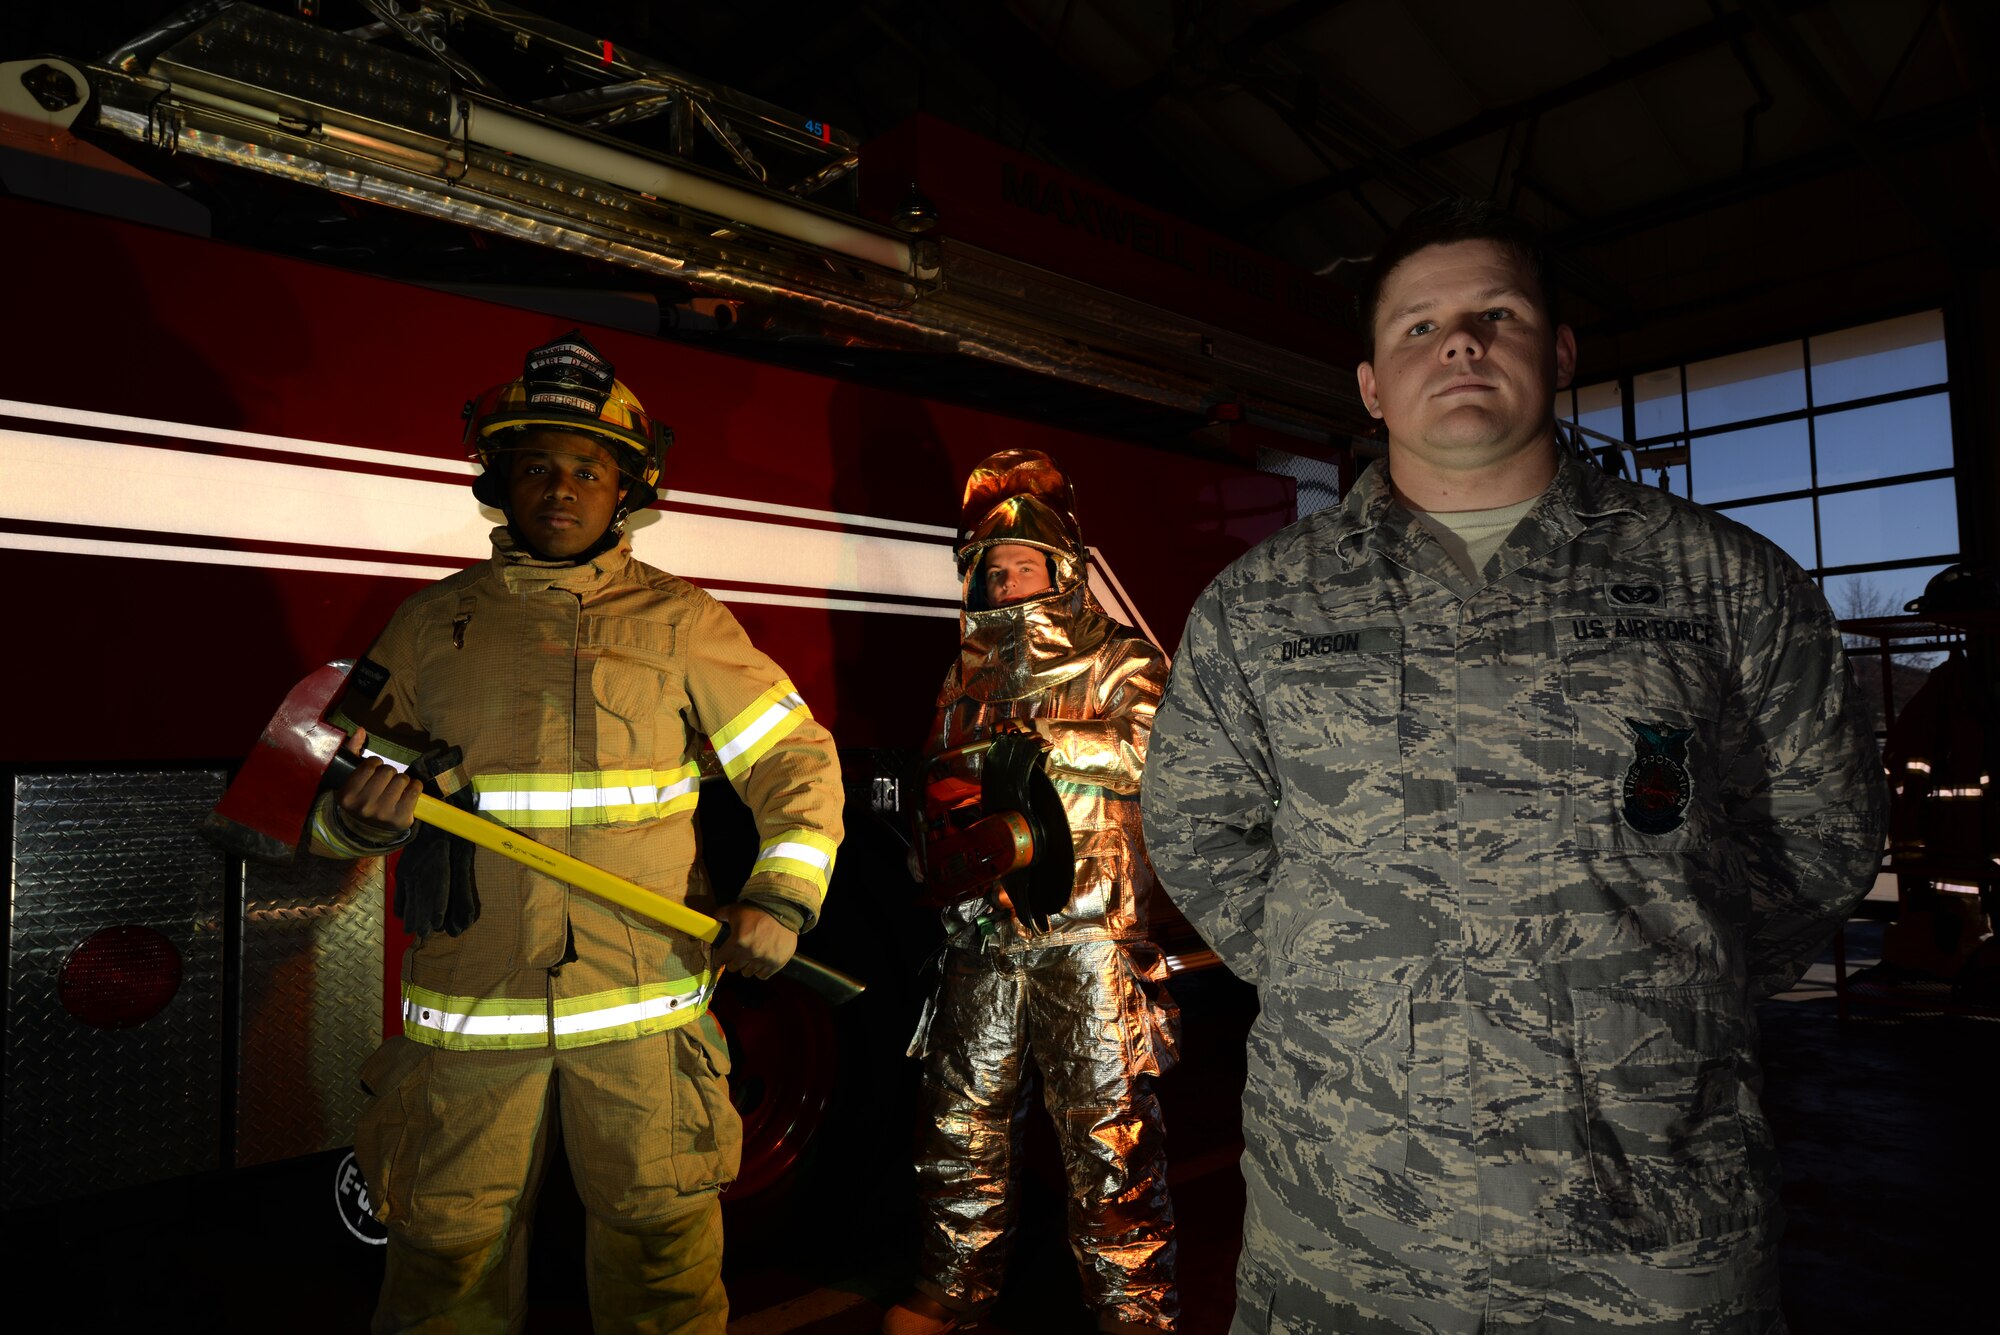 The 42nd Air Base Wing's fire department earned a recommendation for becoming an accredited institution through the Commission on Fire Accreditation on Maxwell Air Force Base, Jan. 9, 2015. Culminating a four-year process, Maxwell will be the first base in Air Education and Training Command to become certified after their recommendation goes before the accrediting agency board on March 18, 2015. (U.S. Air Force photo by Senior Airman William Blankenship/Cleared)
